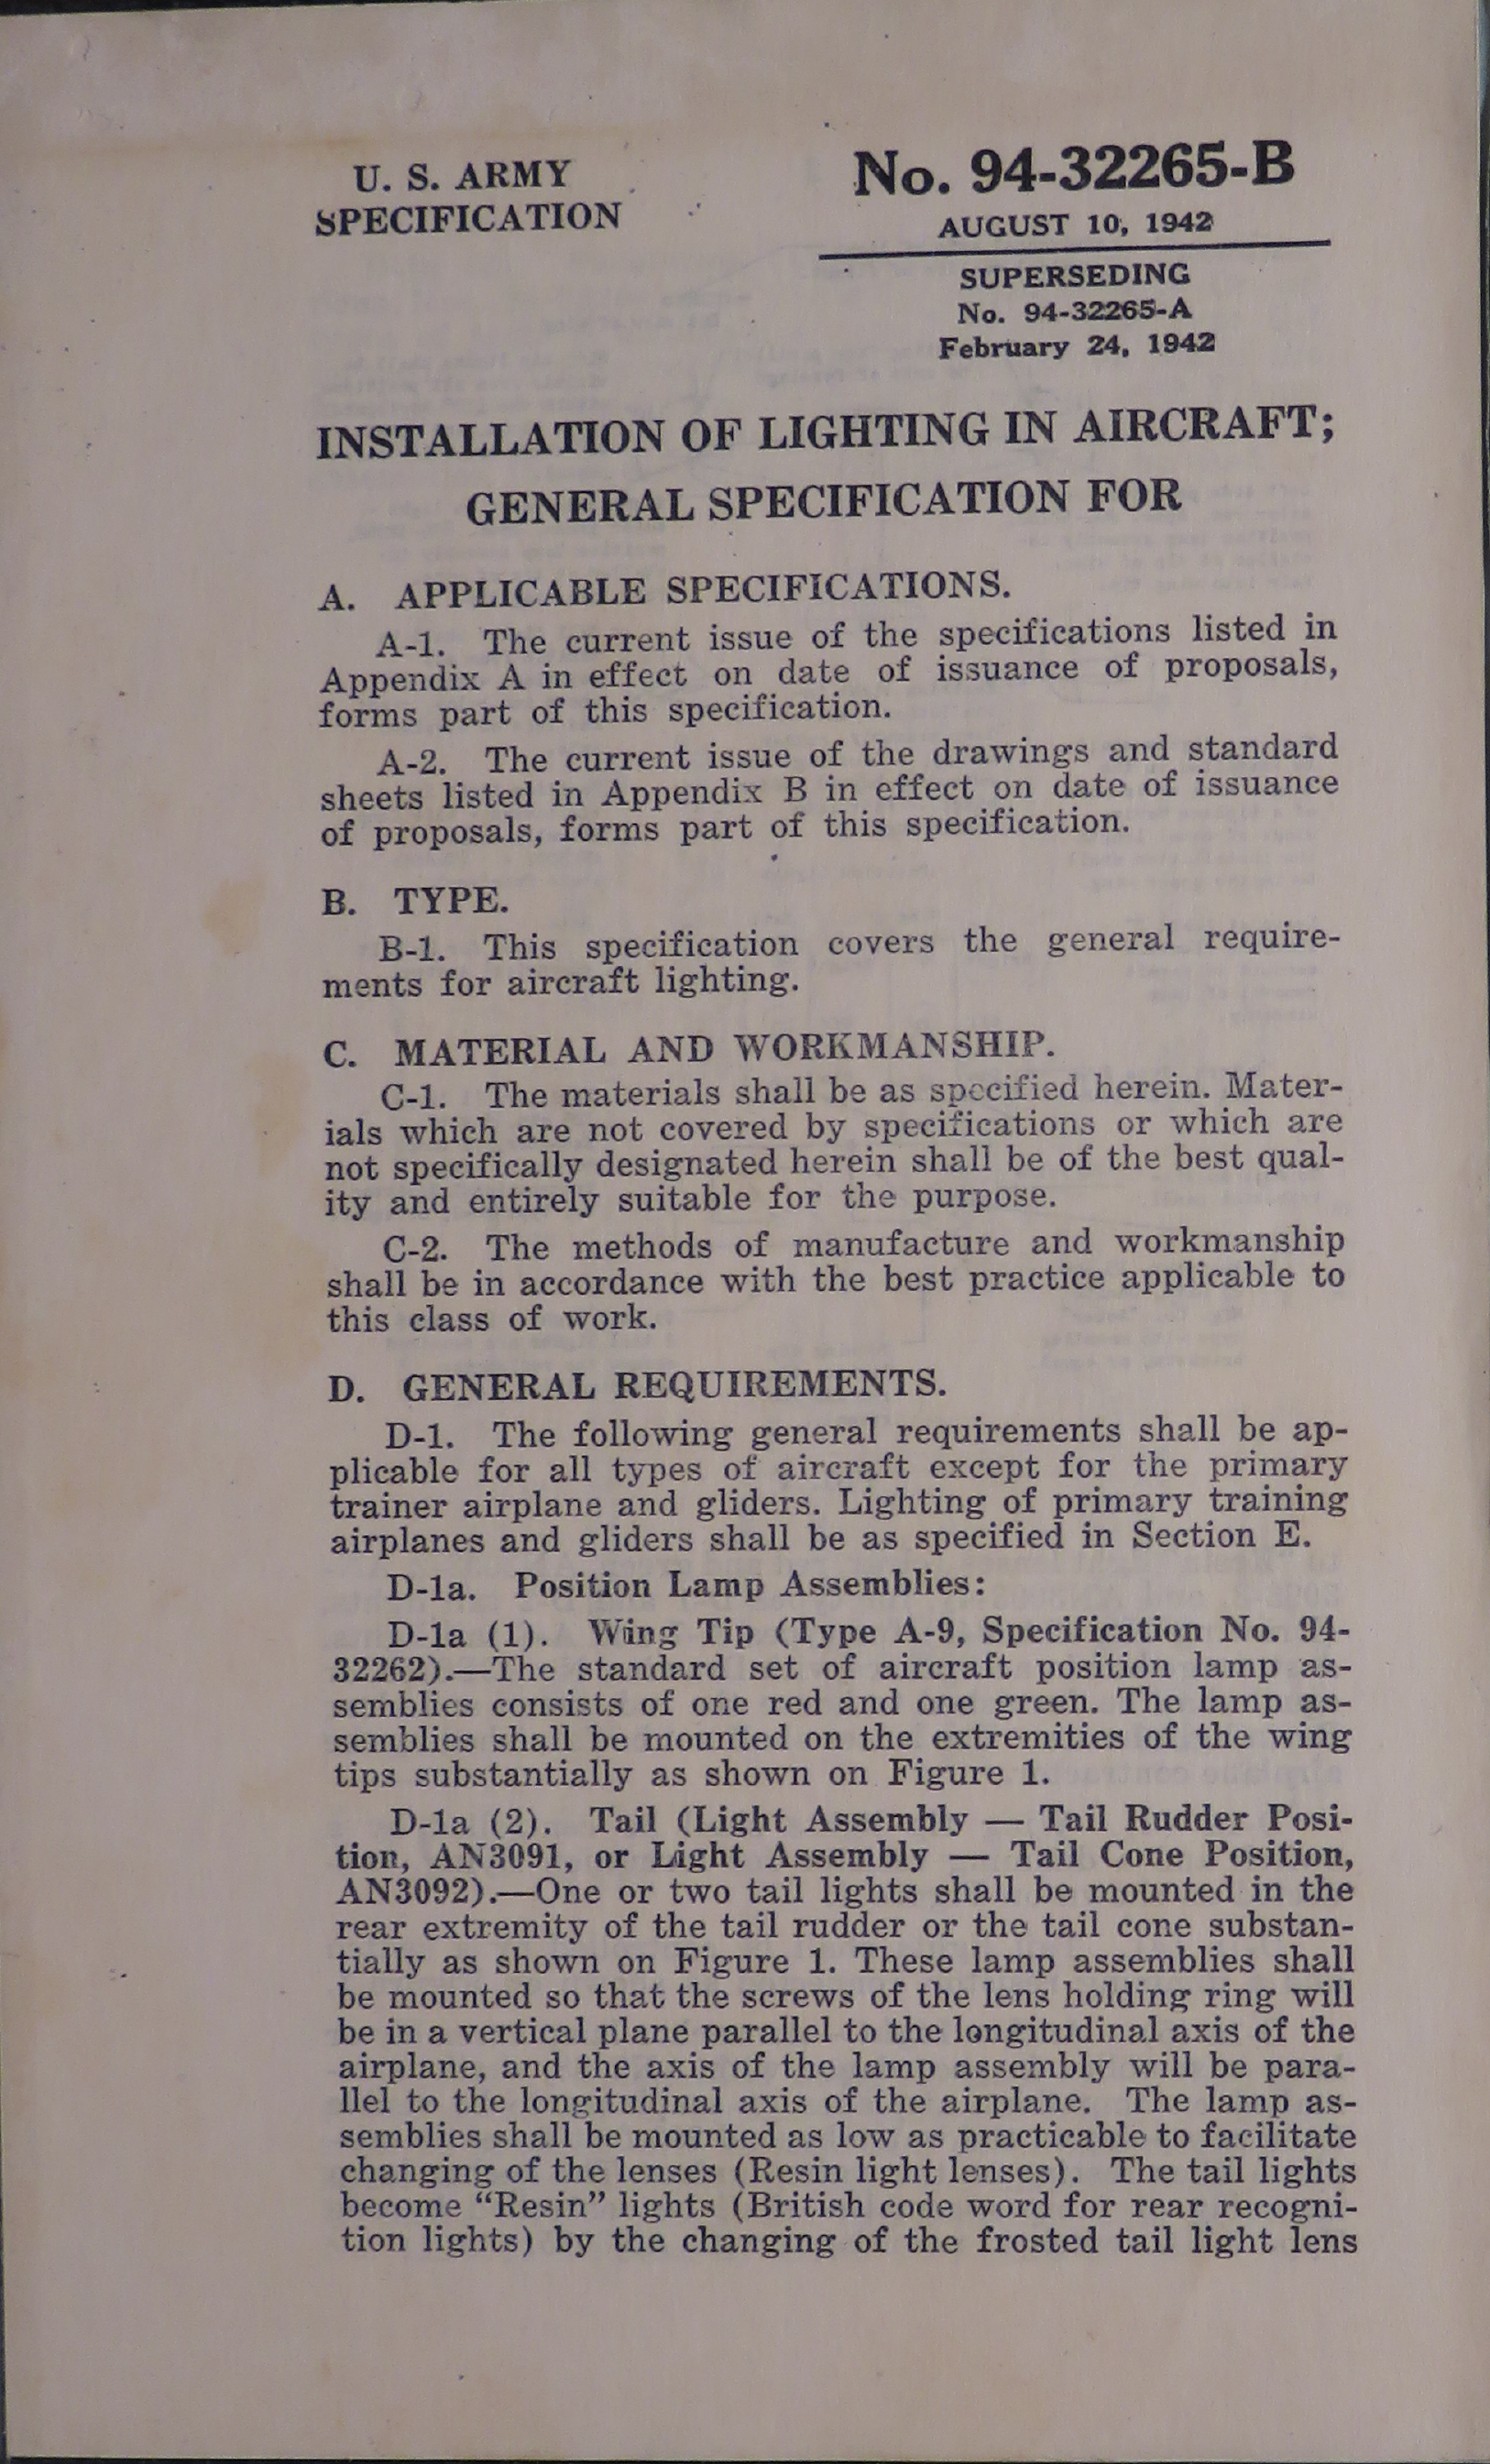 Sample page 1 from AirCorps Library document: General Specification for Installation of Lighting in Aircraft